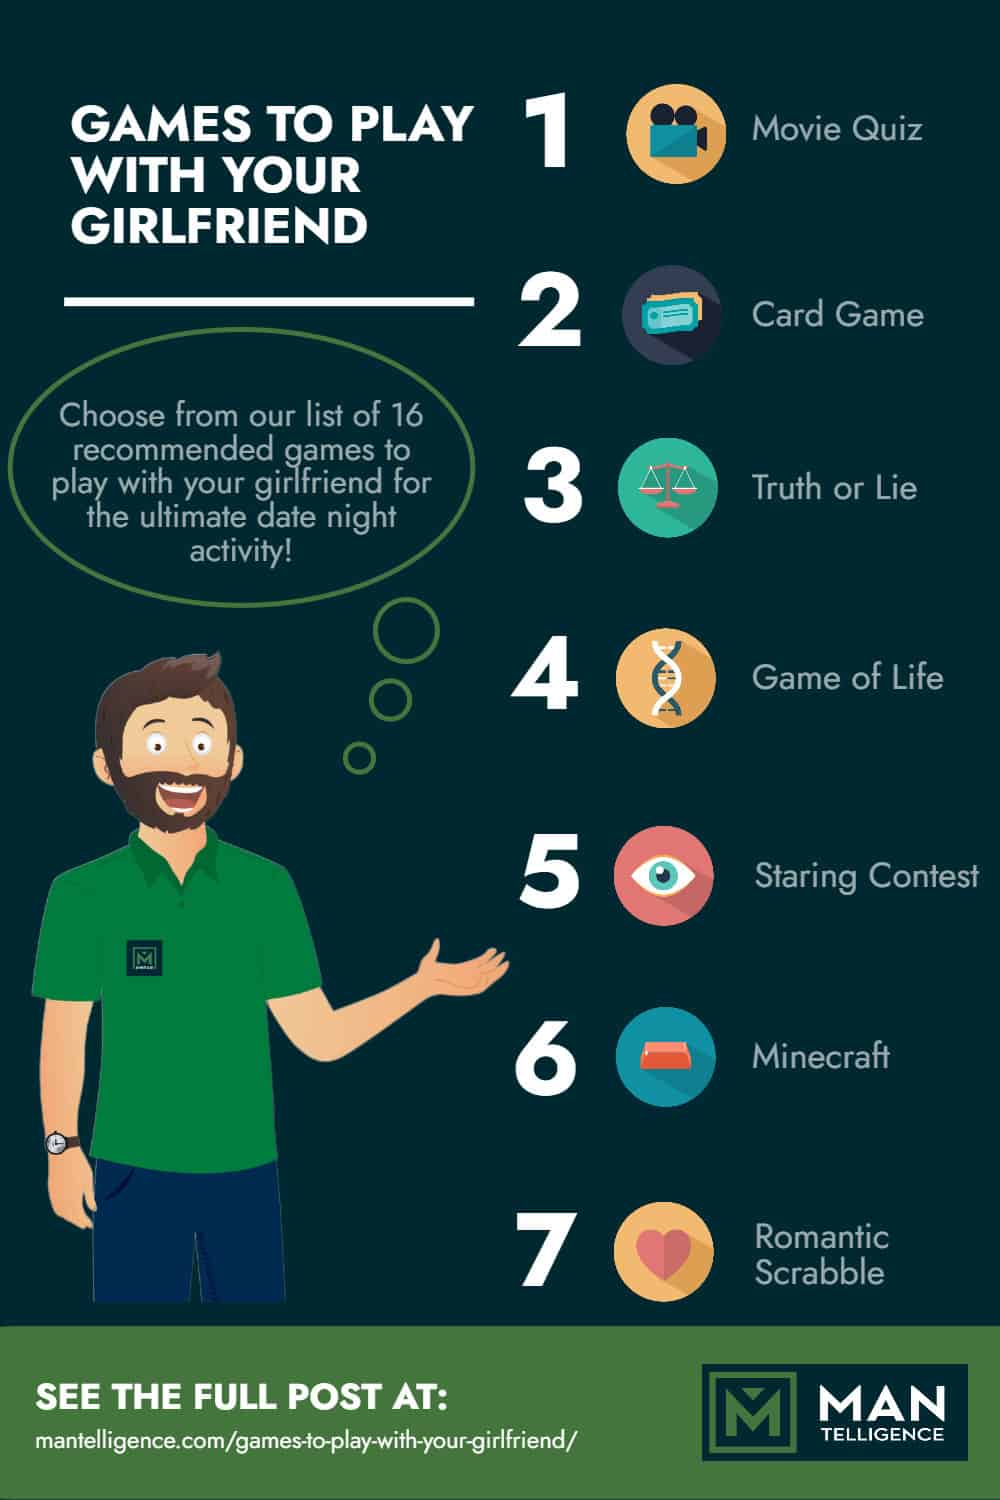 Games To Play With Your Girlfriend - Infographic